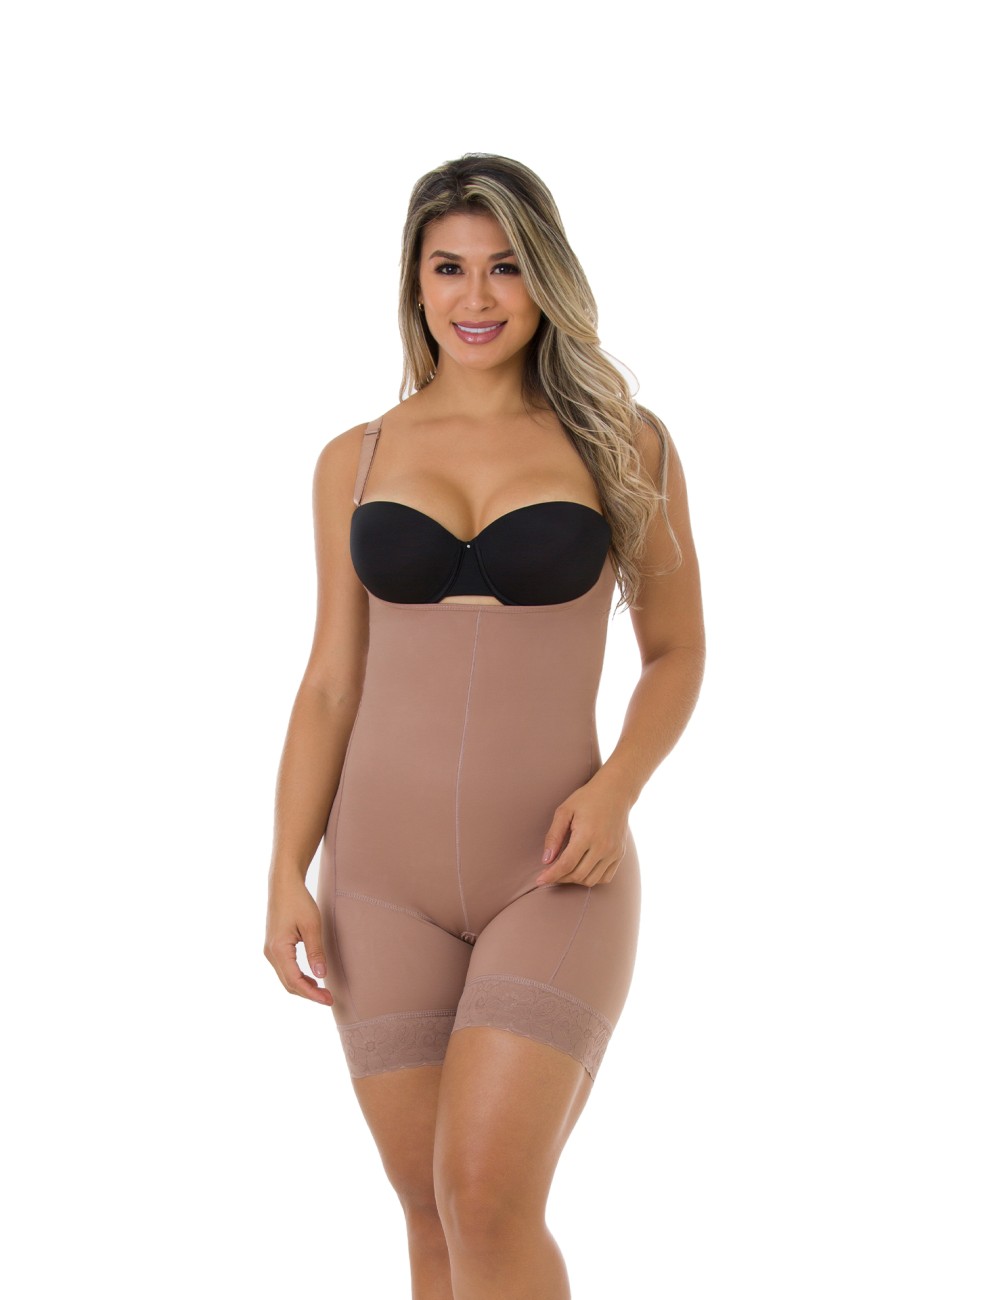 https://www.colmodausa.com/19555-large_default/colombian-girdles-compression-invisible-5f328esh-c.jpg